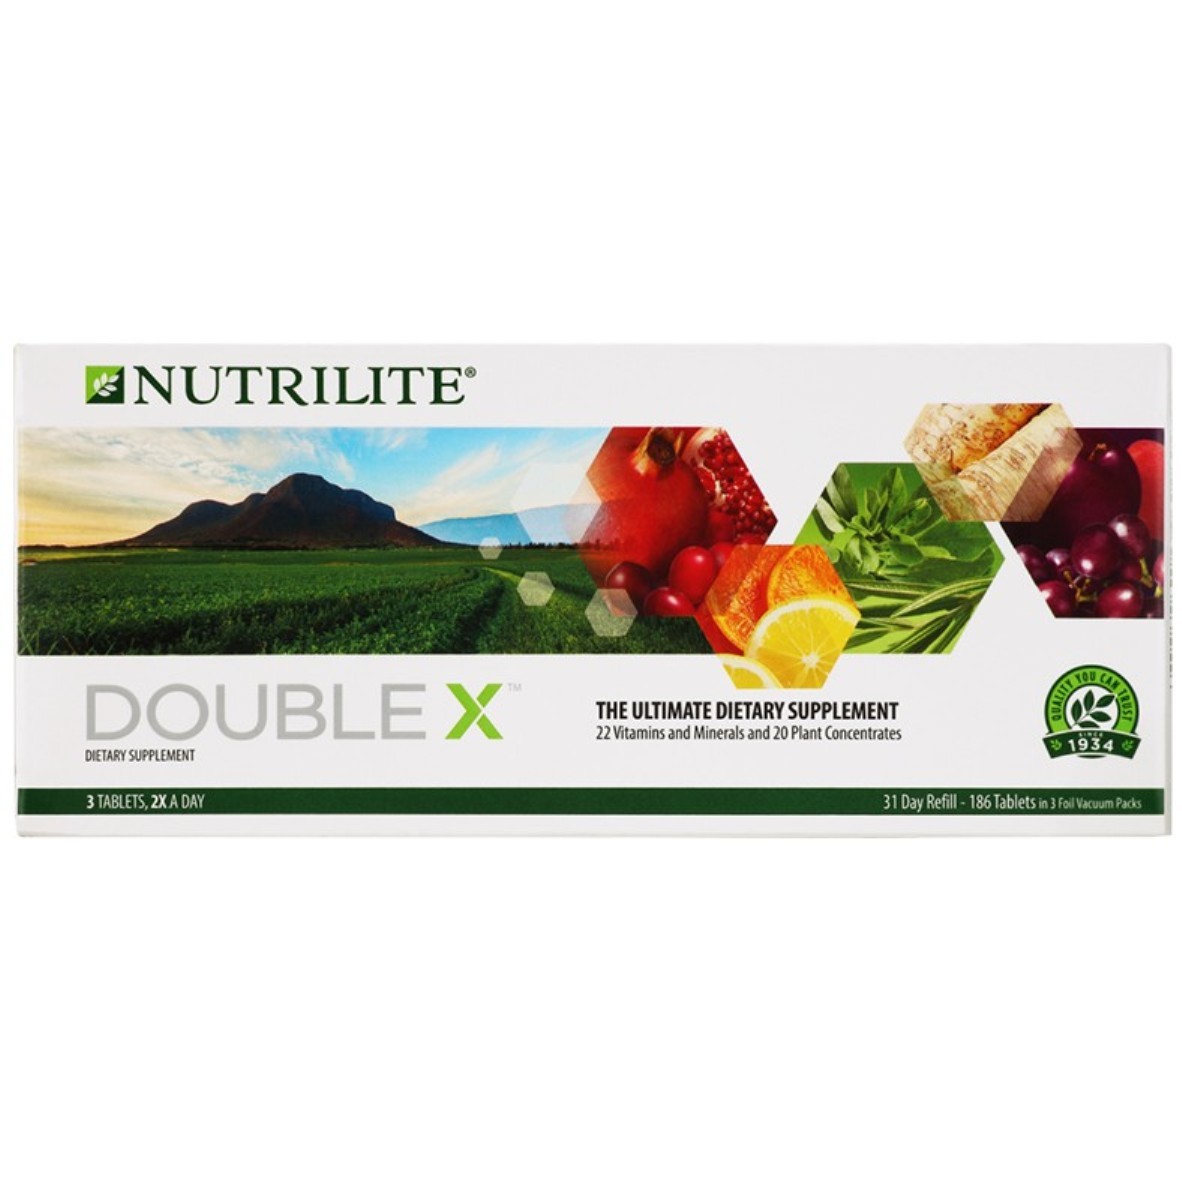 186 Tabs NUTRILITE Double X™ Multivitamin 31-Day Refill New Improved Formula DHL - $89.90